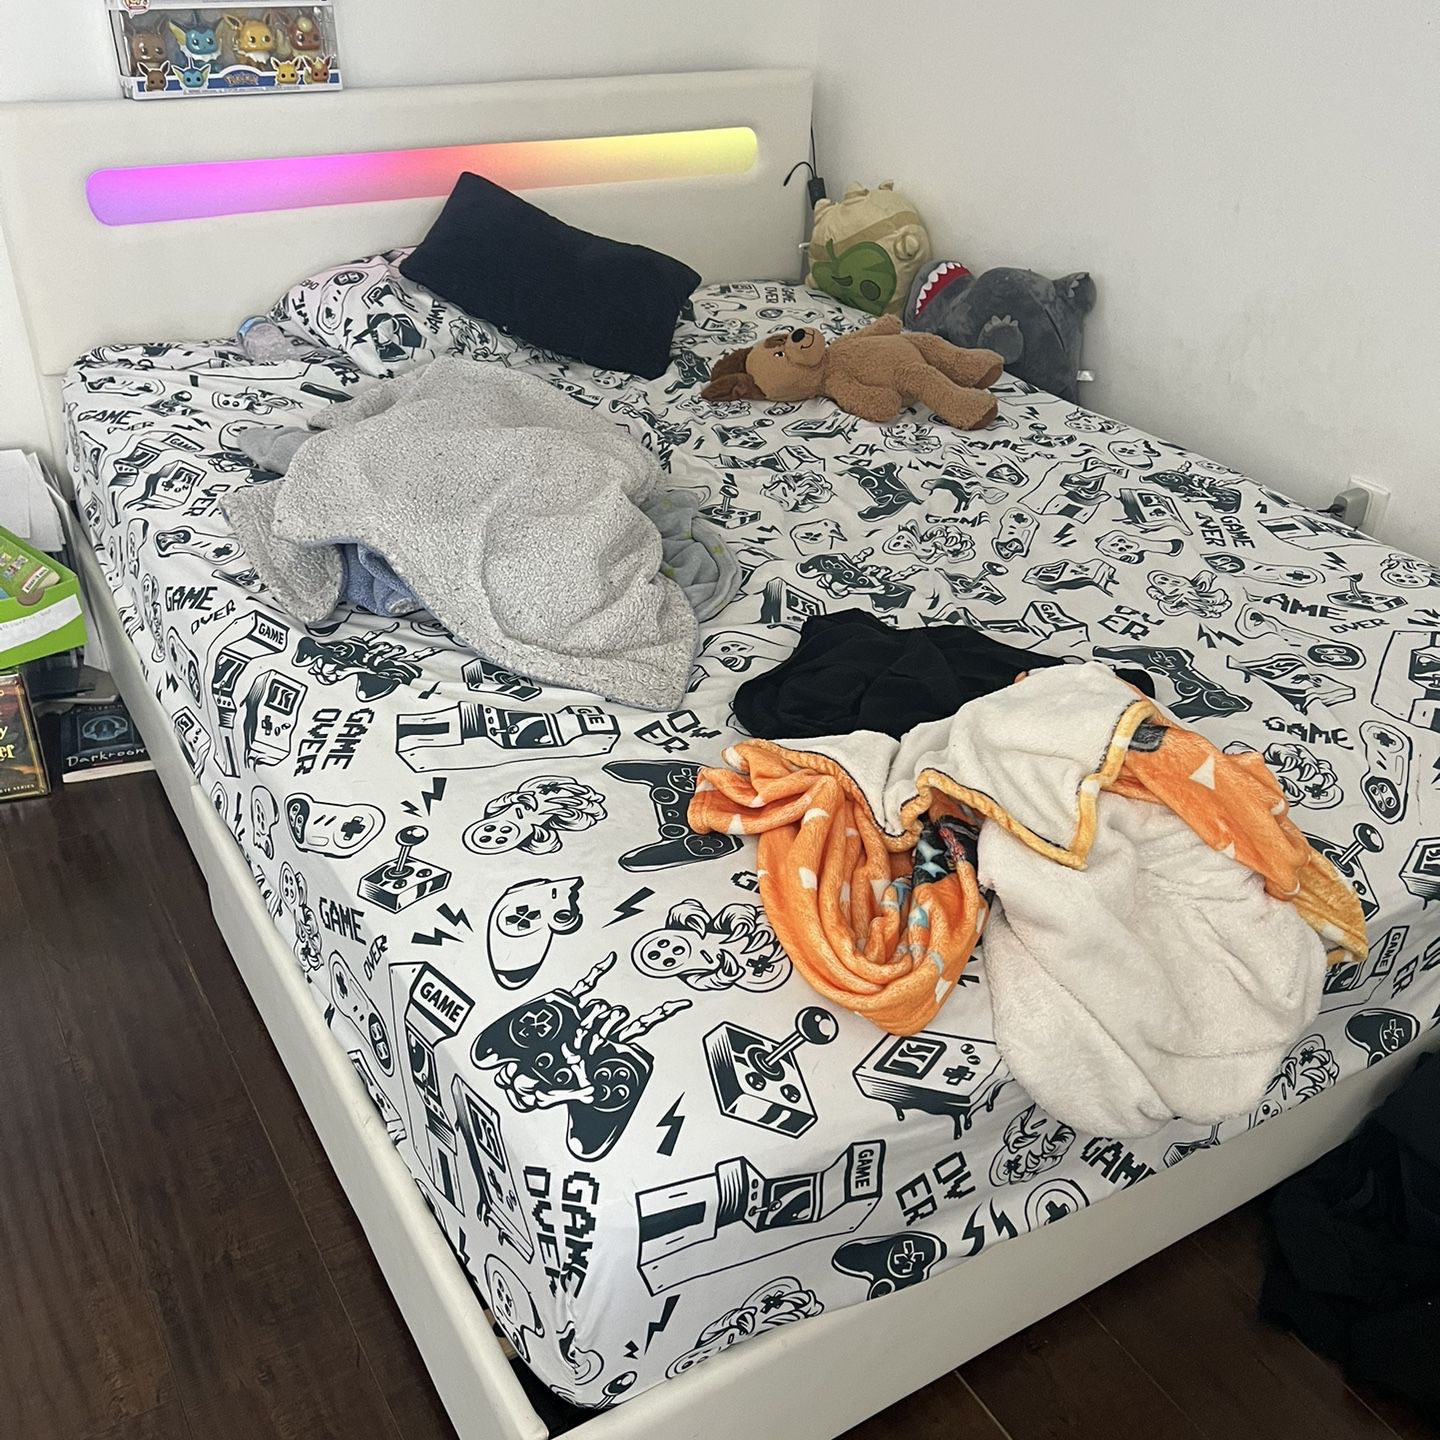 Like New Bed Frame With Storage And Chroma Lights (FREE POSSIBLE!!)